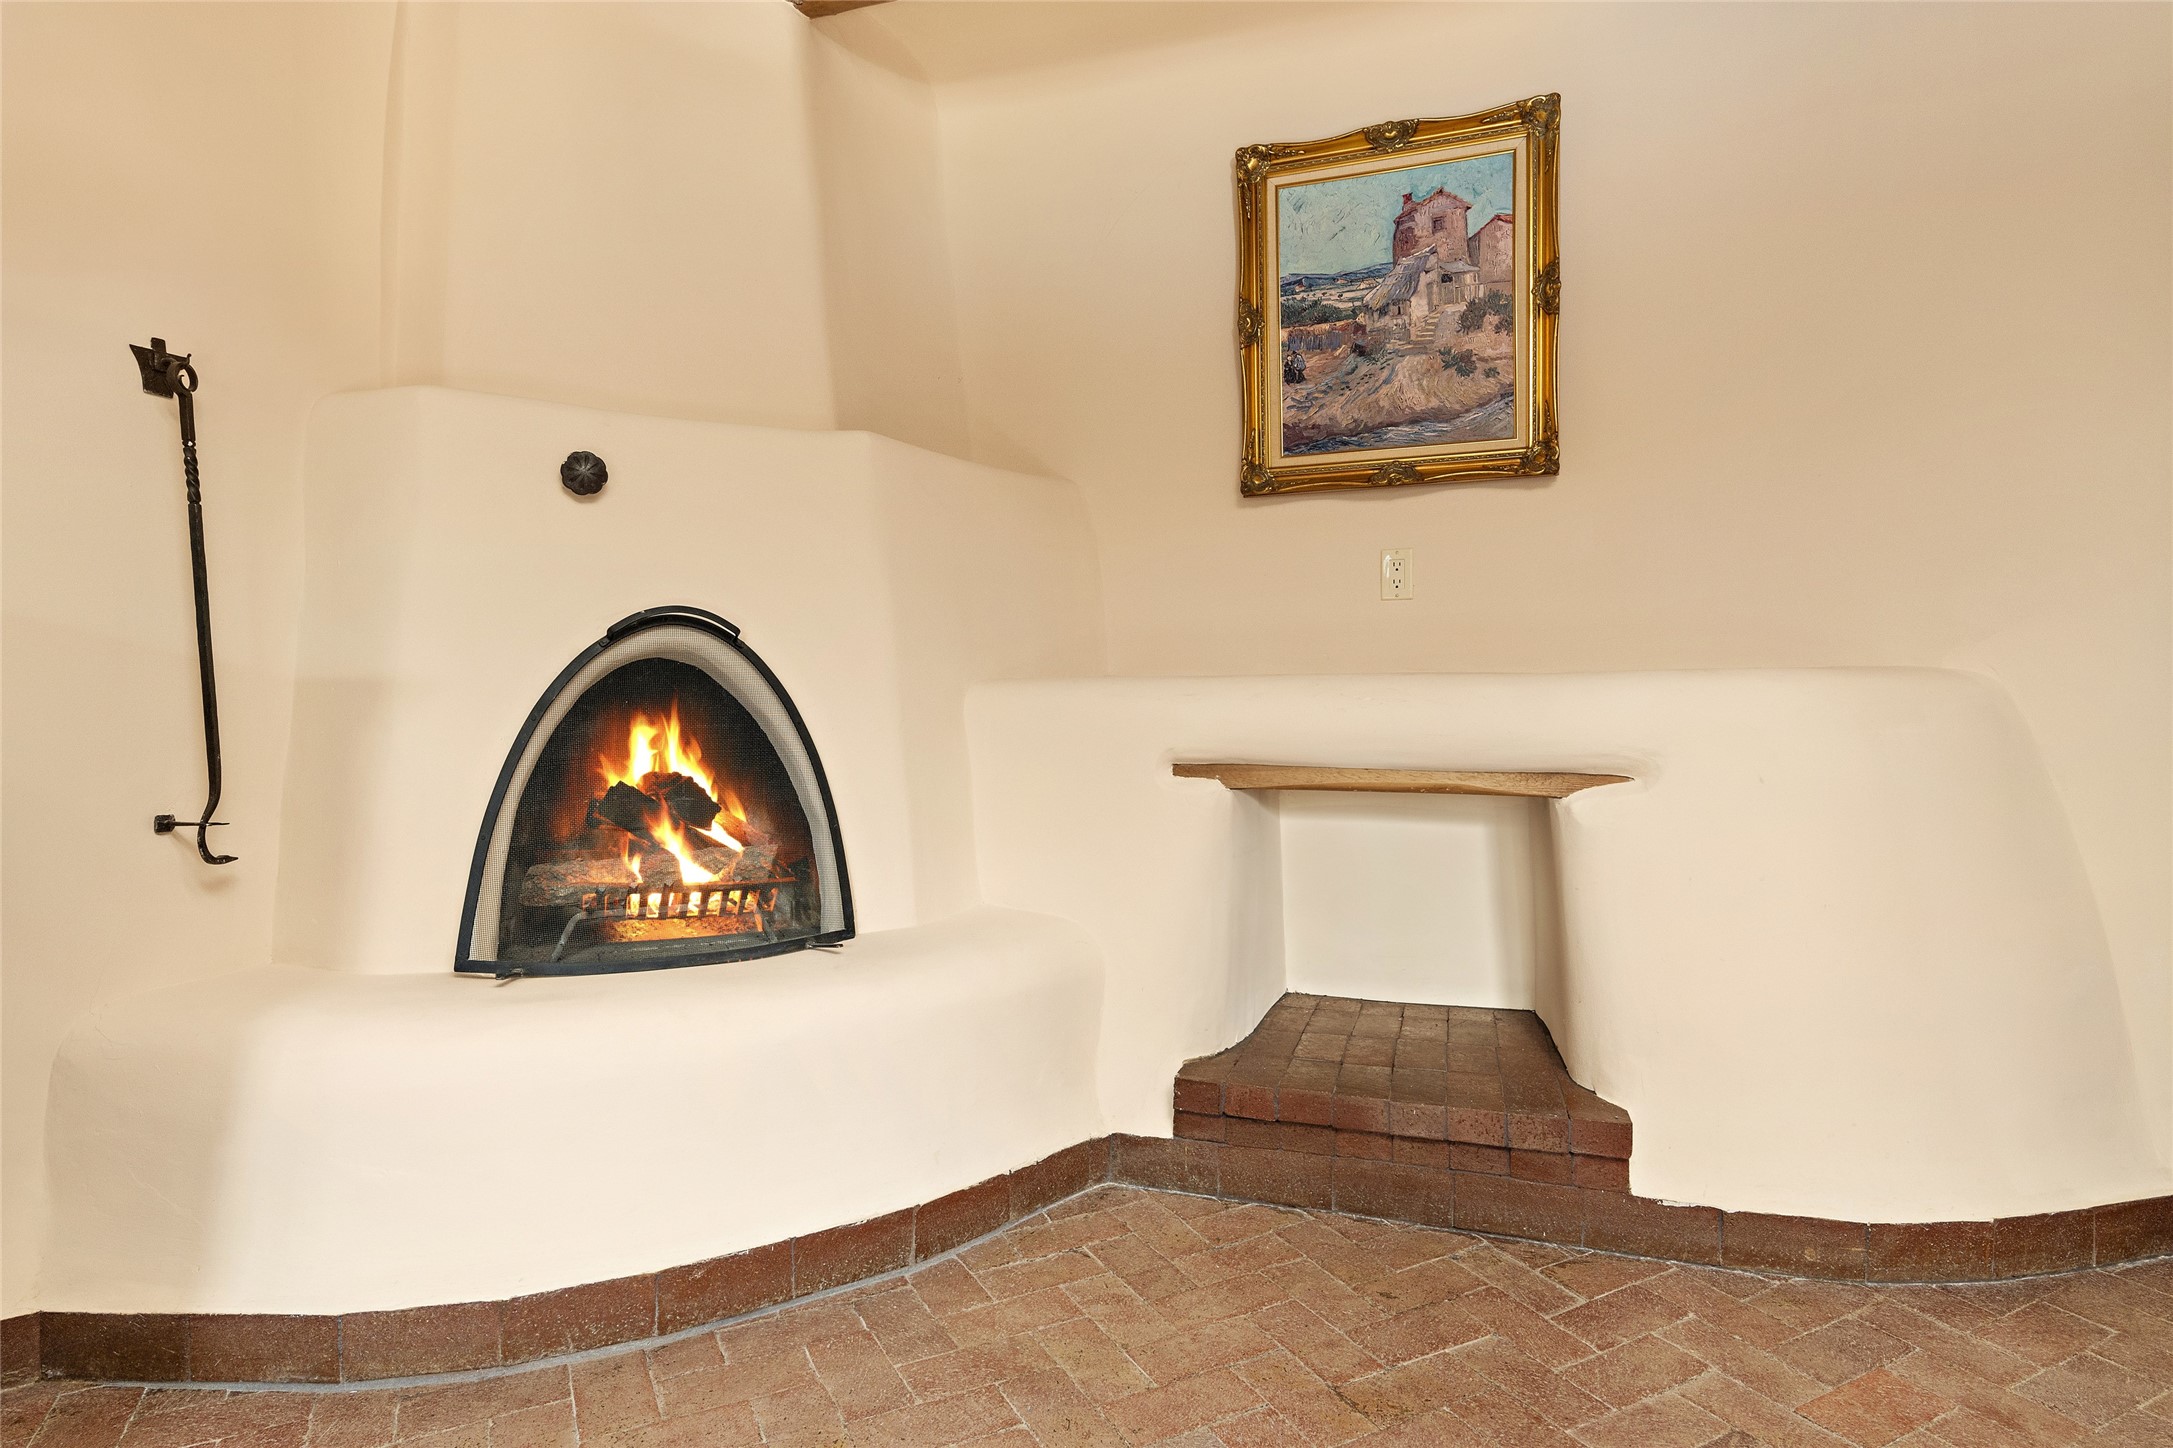 325 Brownell Howland, Santa Fe, New Mexico 87501, 4 Bedrooms Bedrooms, ,8 BathroomsBathrooms,Residential,For Sale,325 Brownell Howland,202234273